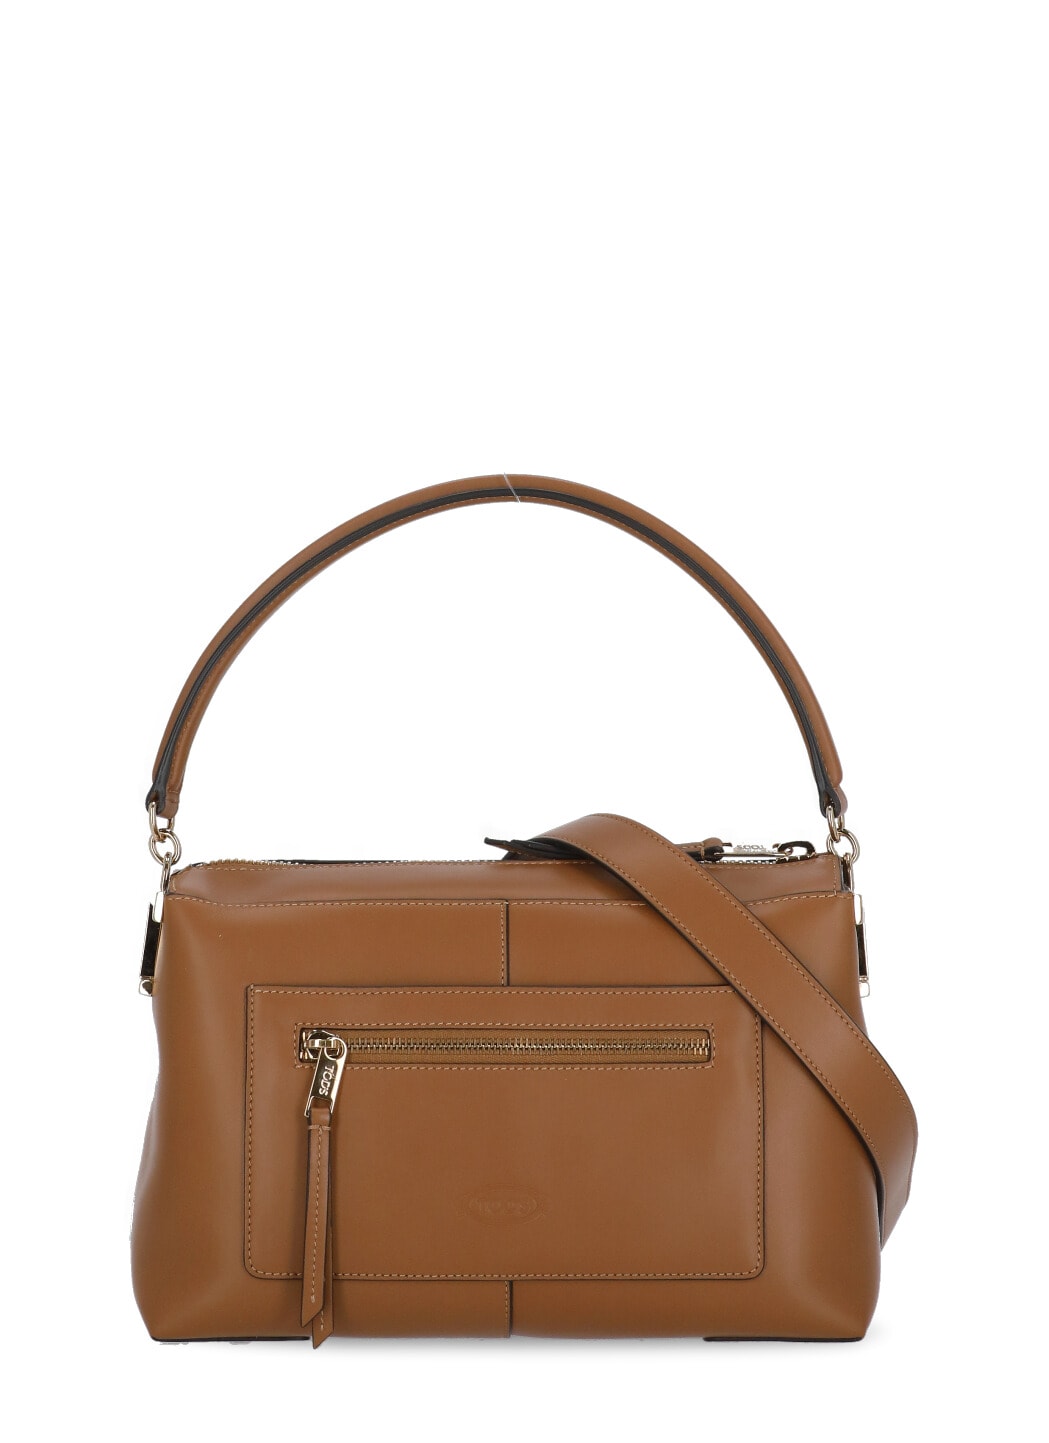 TOD'S TOTE TIMELESS HAND BAG